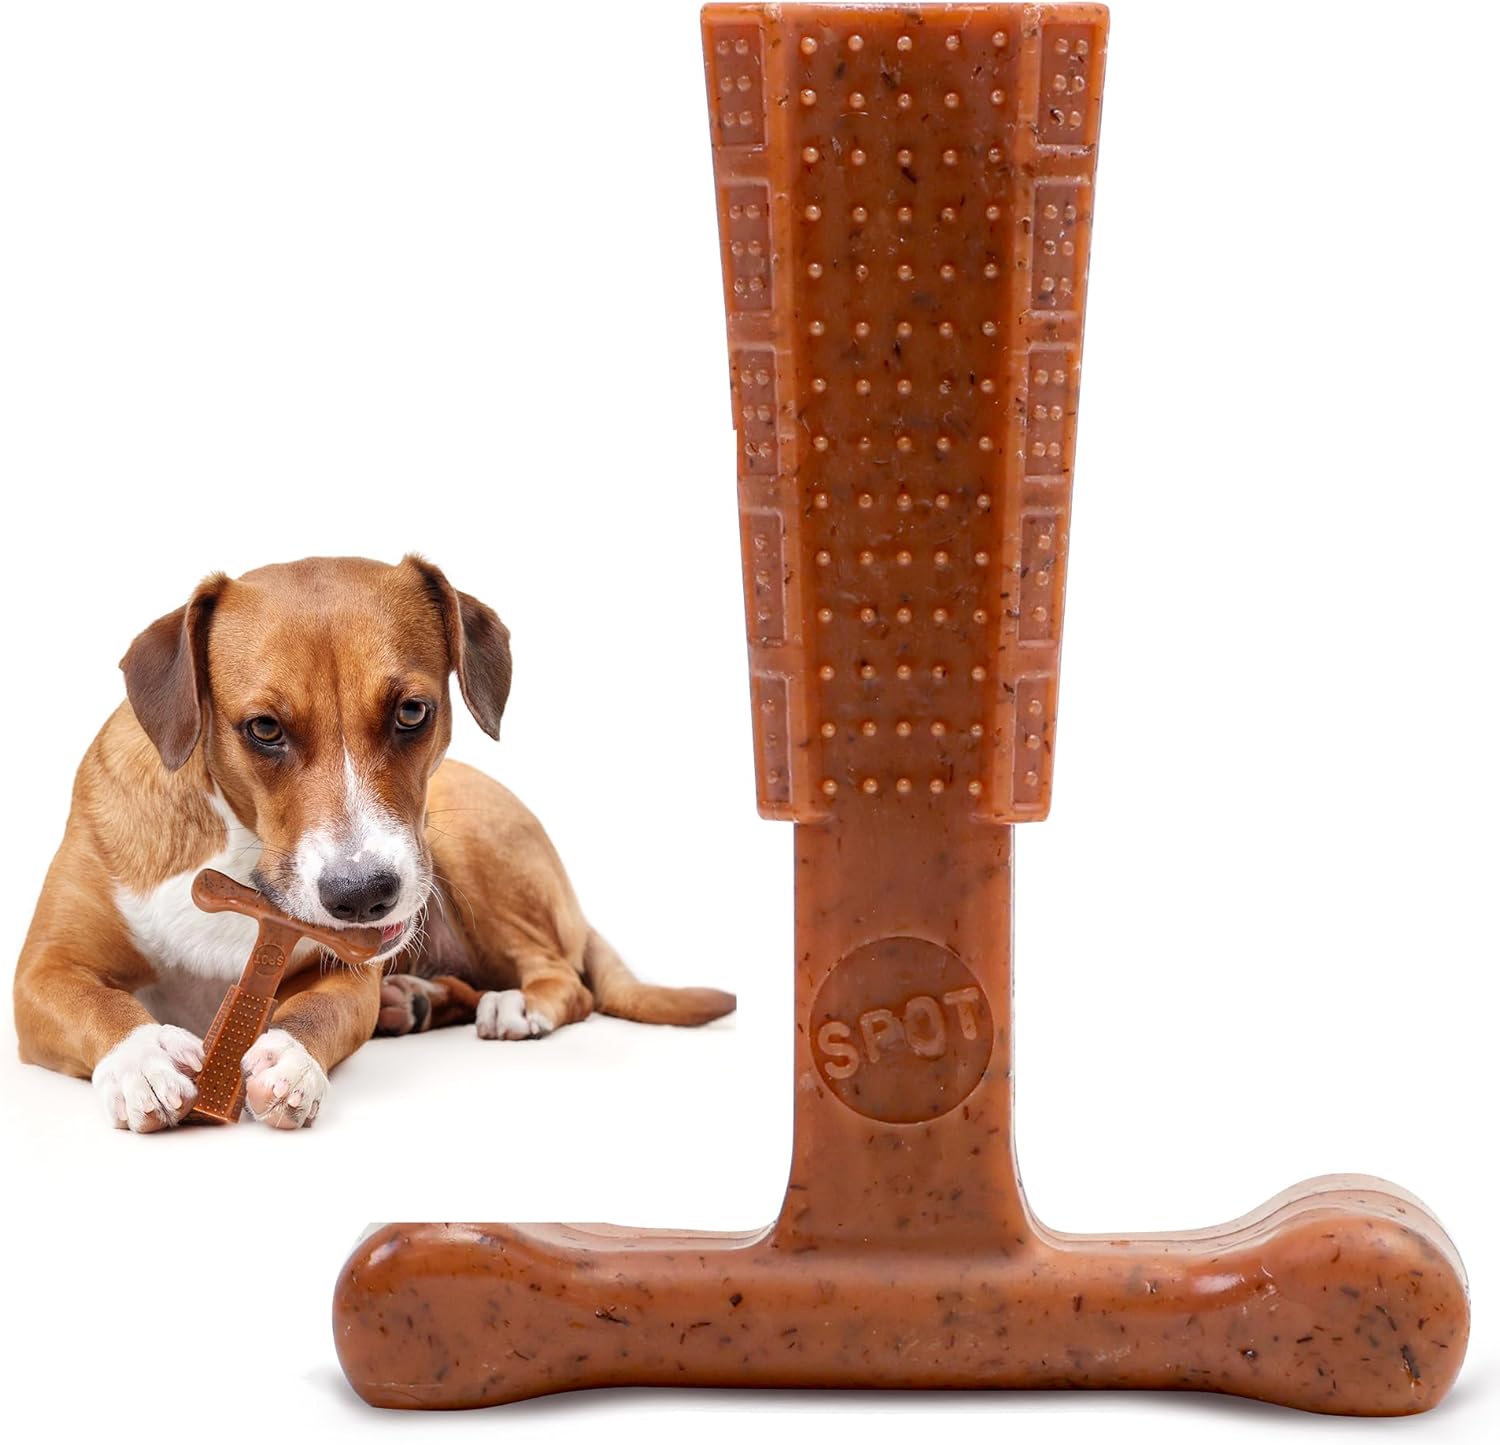 SPOT by Ethical Products - Bambone Plus – Easy Grip Durable Dog Chew Toy for Aggressive Chewers Puppies and Dogs - Beef- Large Brown Medium